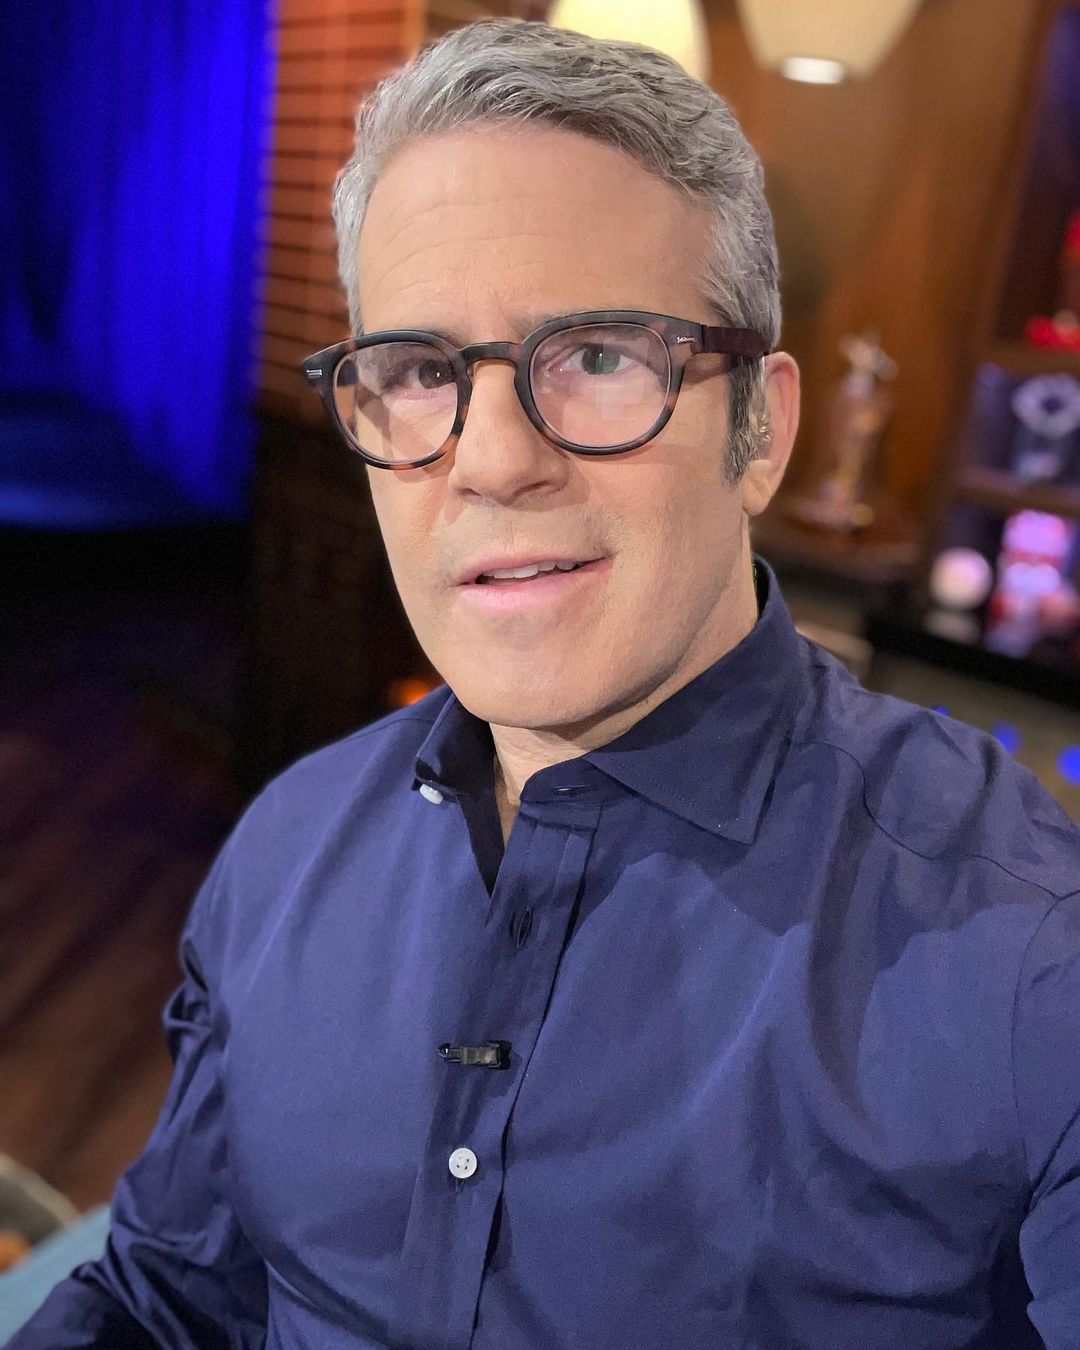 A photo showing Andy Cohen in a blue T-shirt and awesome glasses.